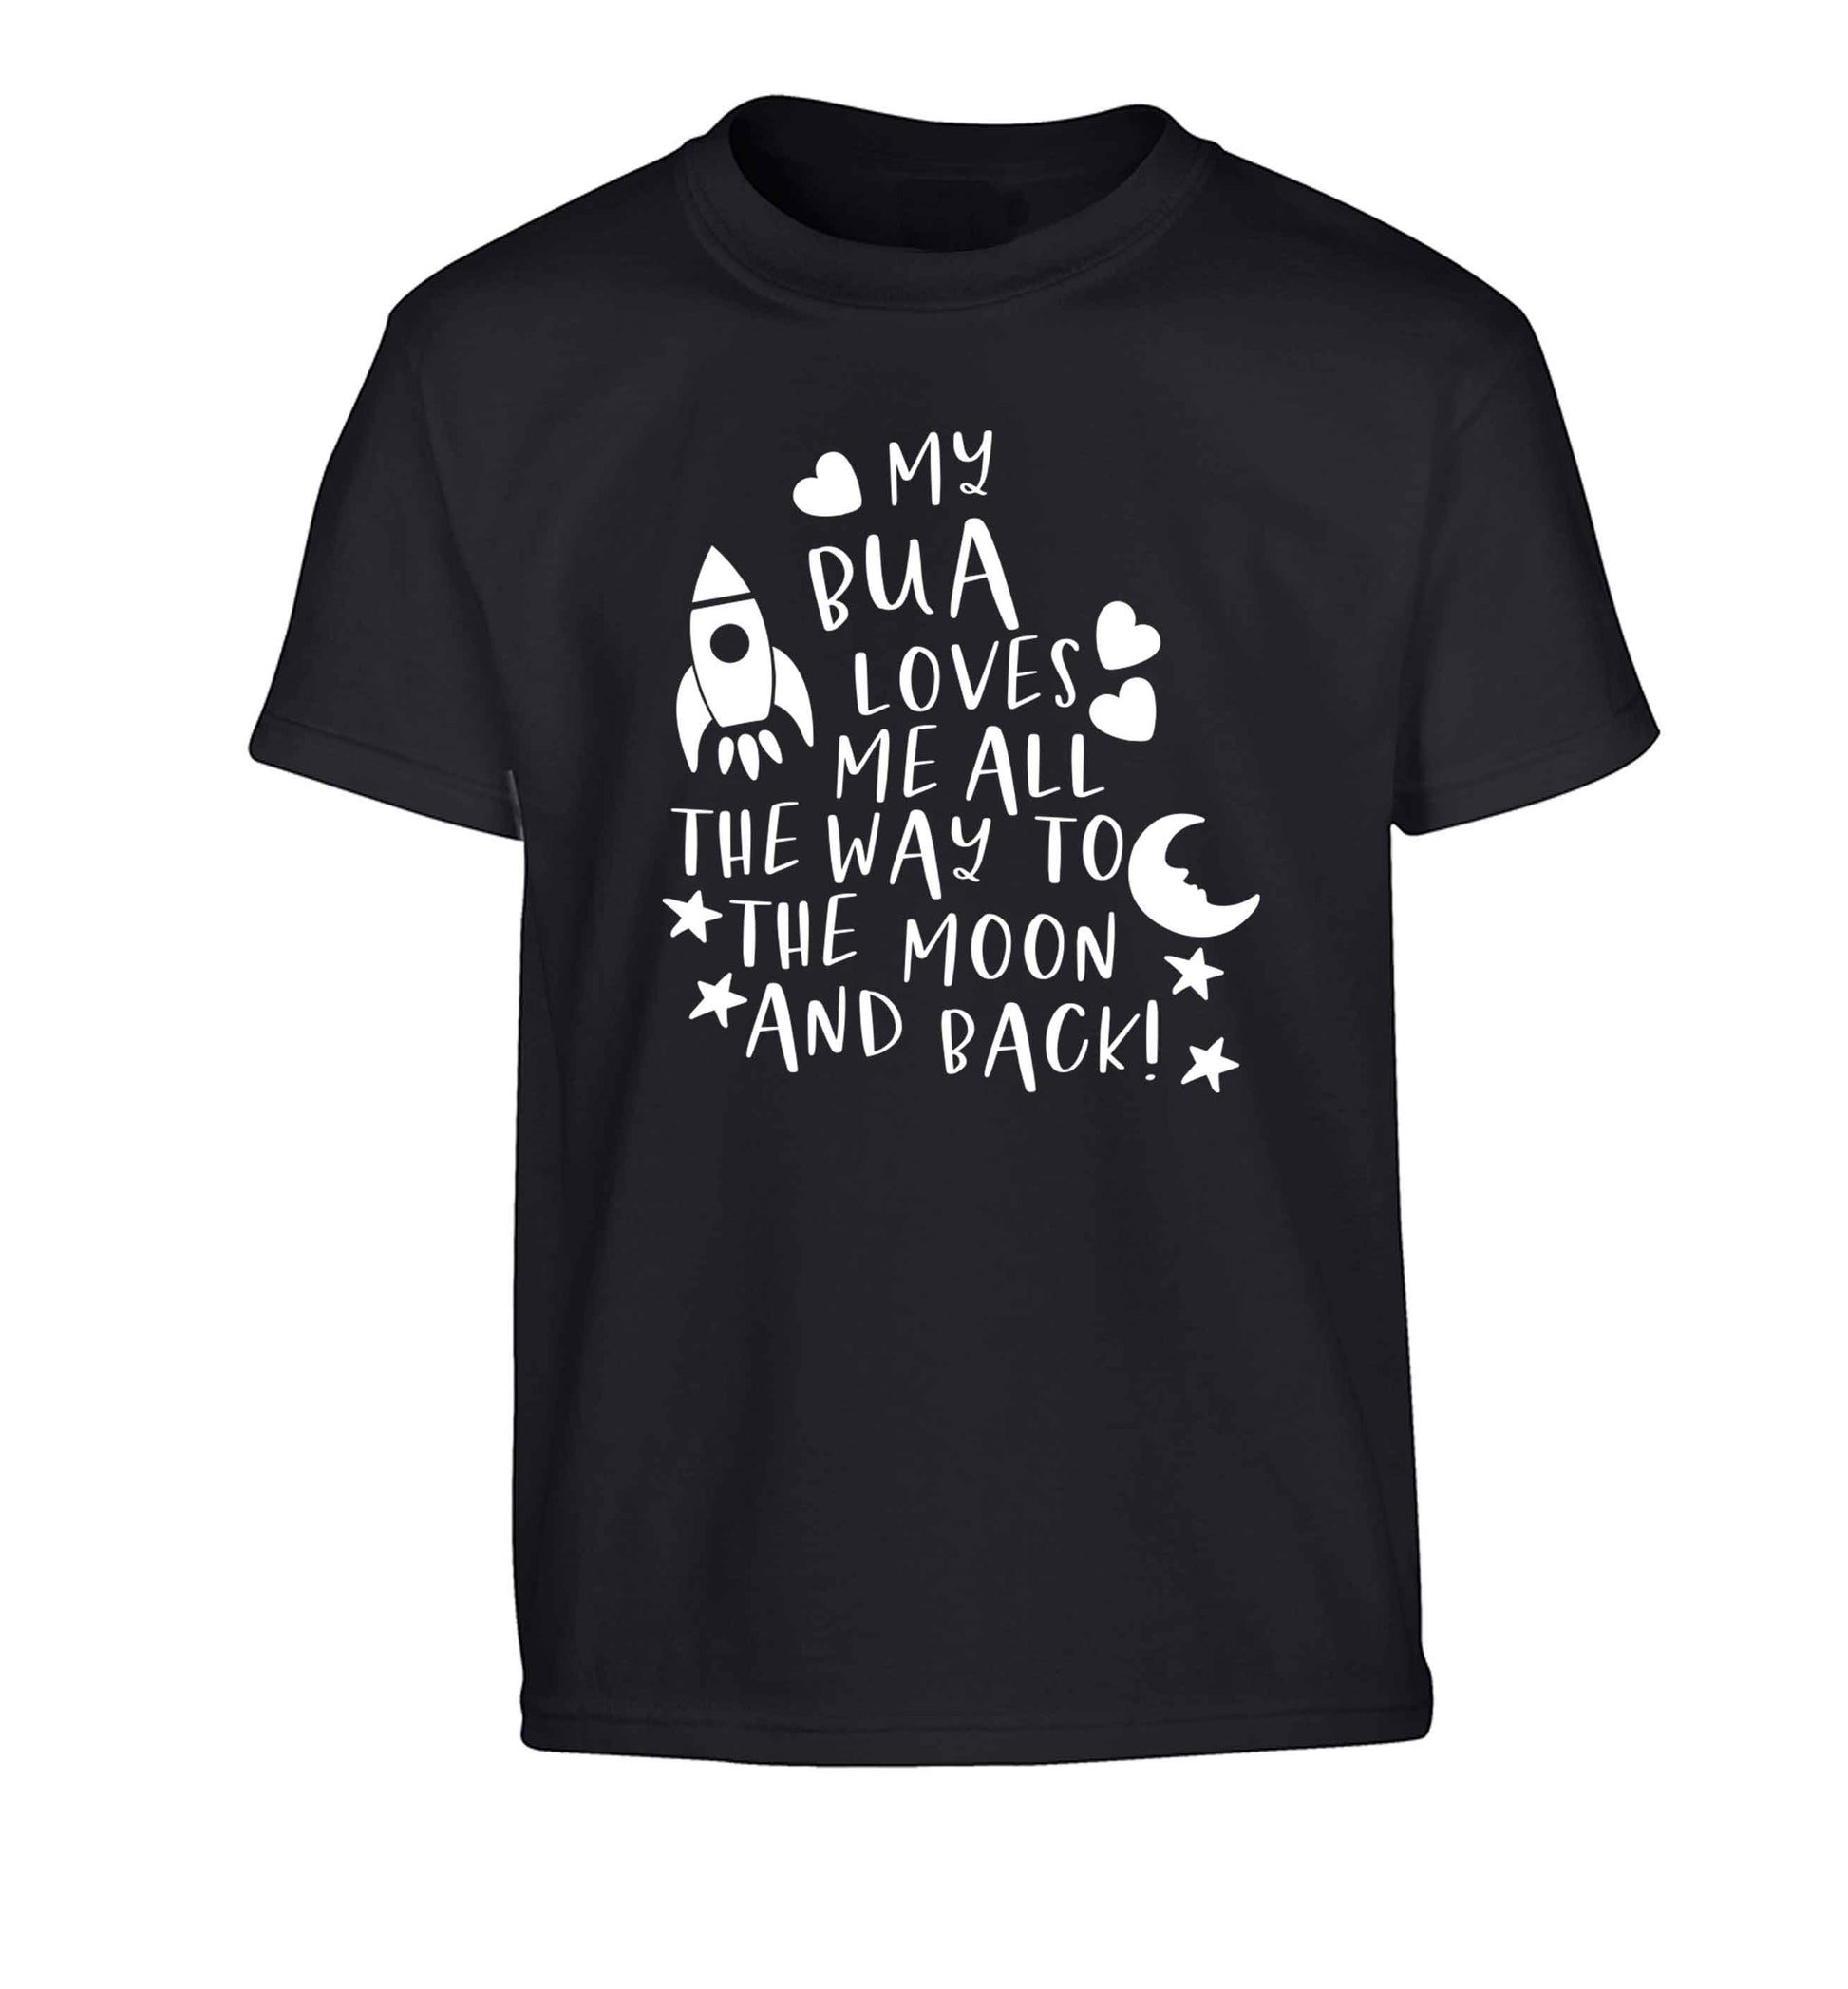 My bua loves me all they way to the moon and back Children's black Tshirt 12-13 Years